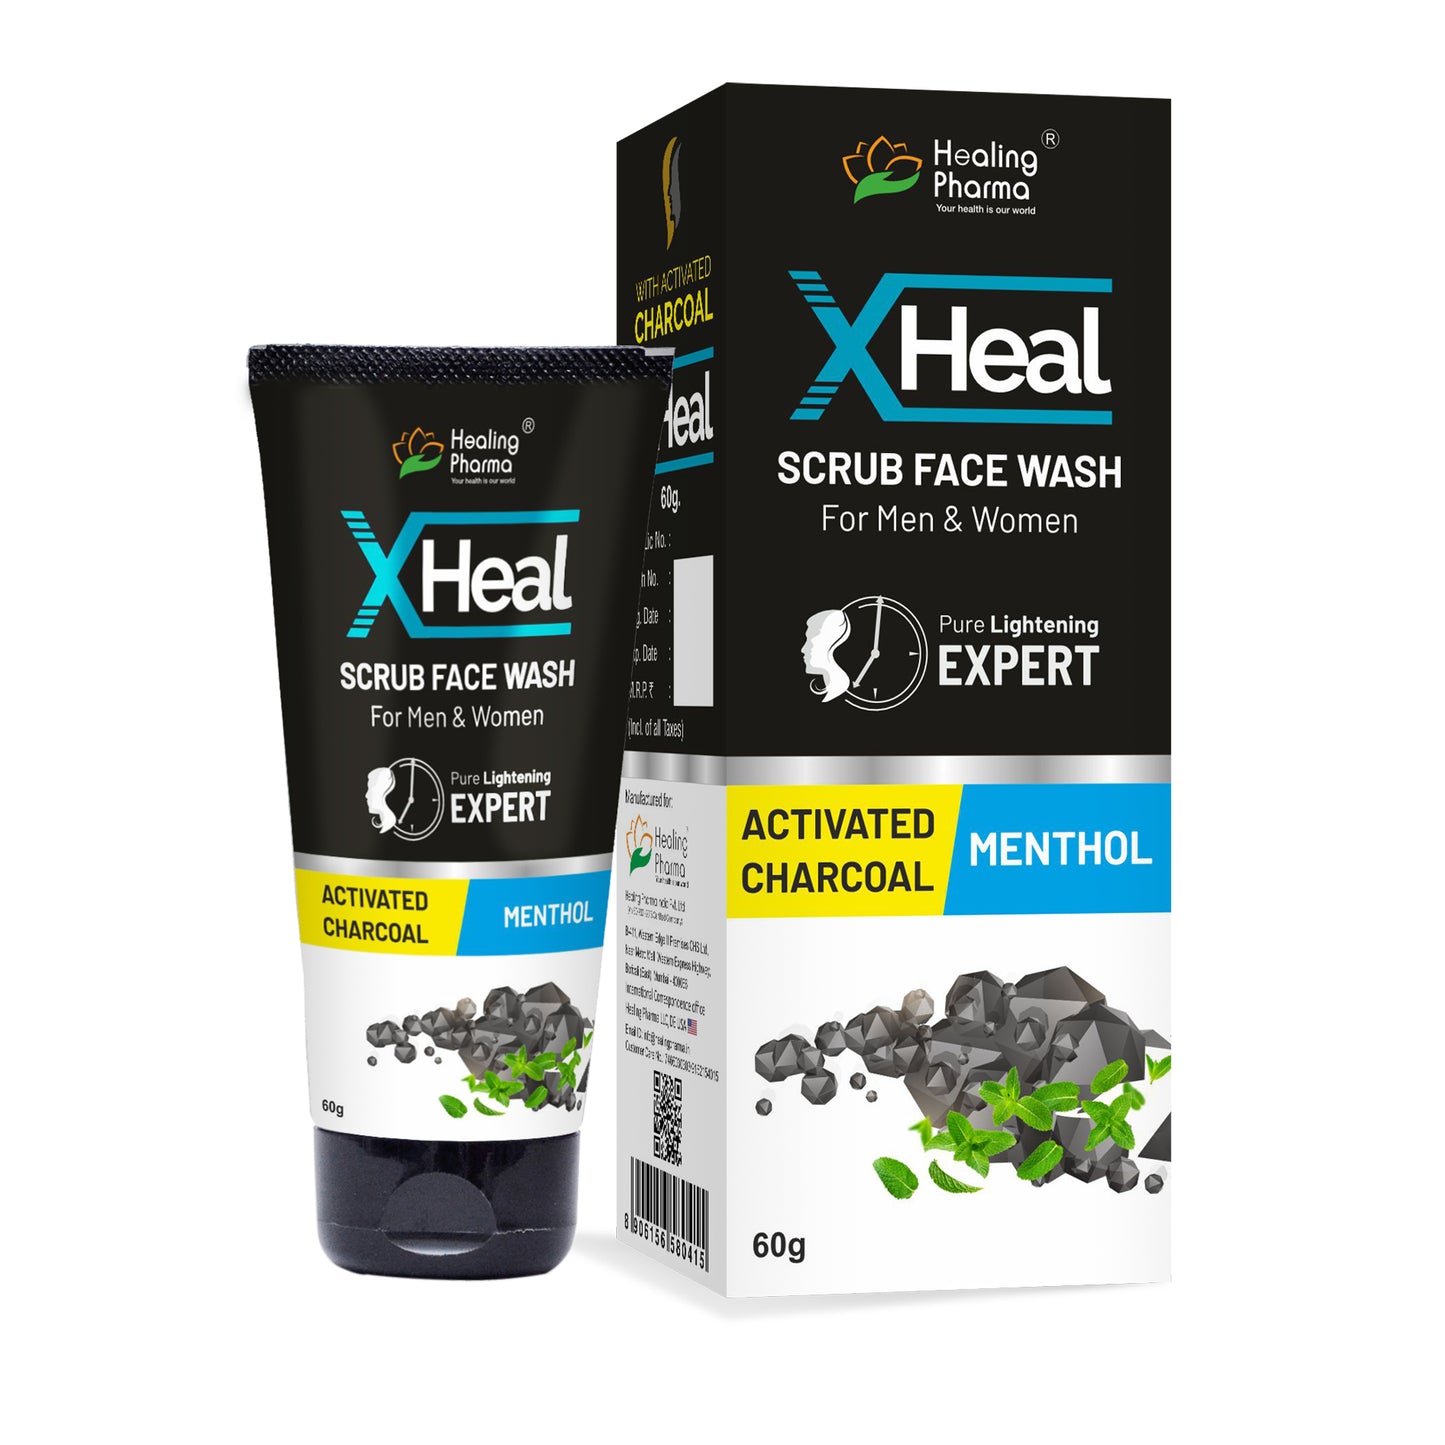 xheal activated charcoal scrub face wash